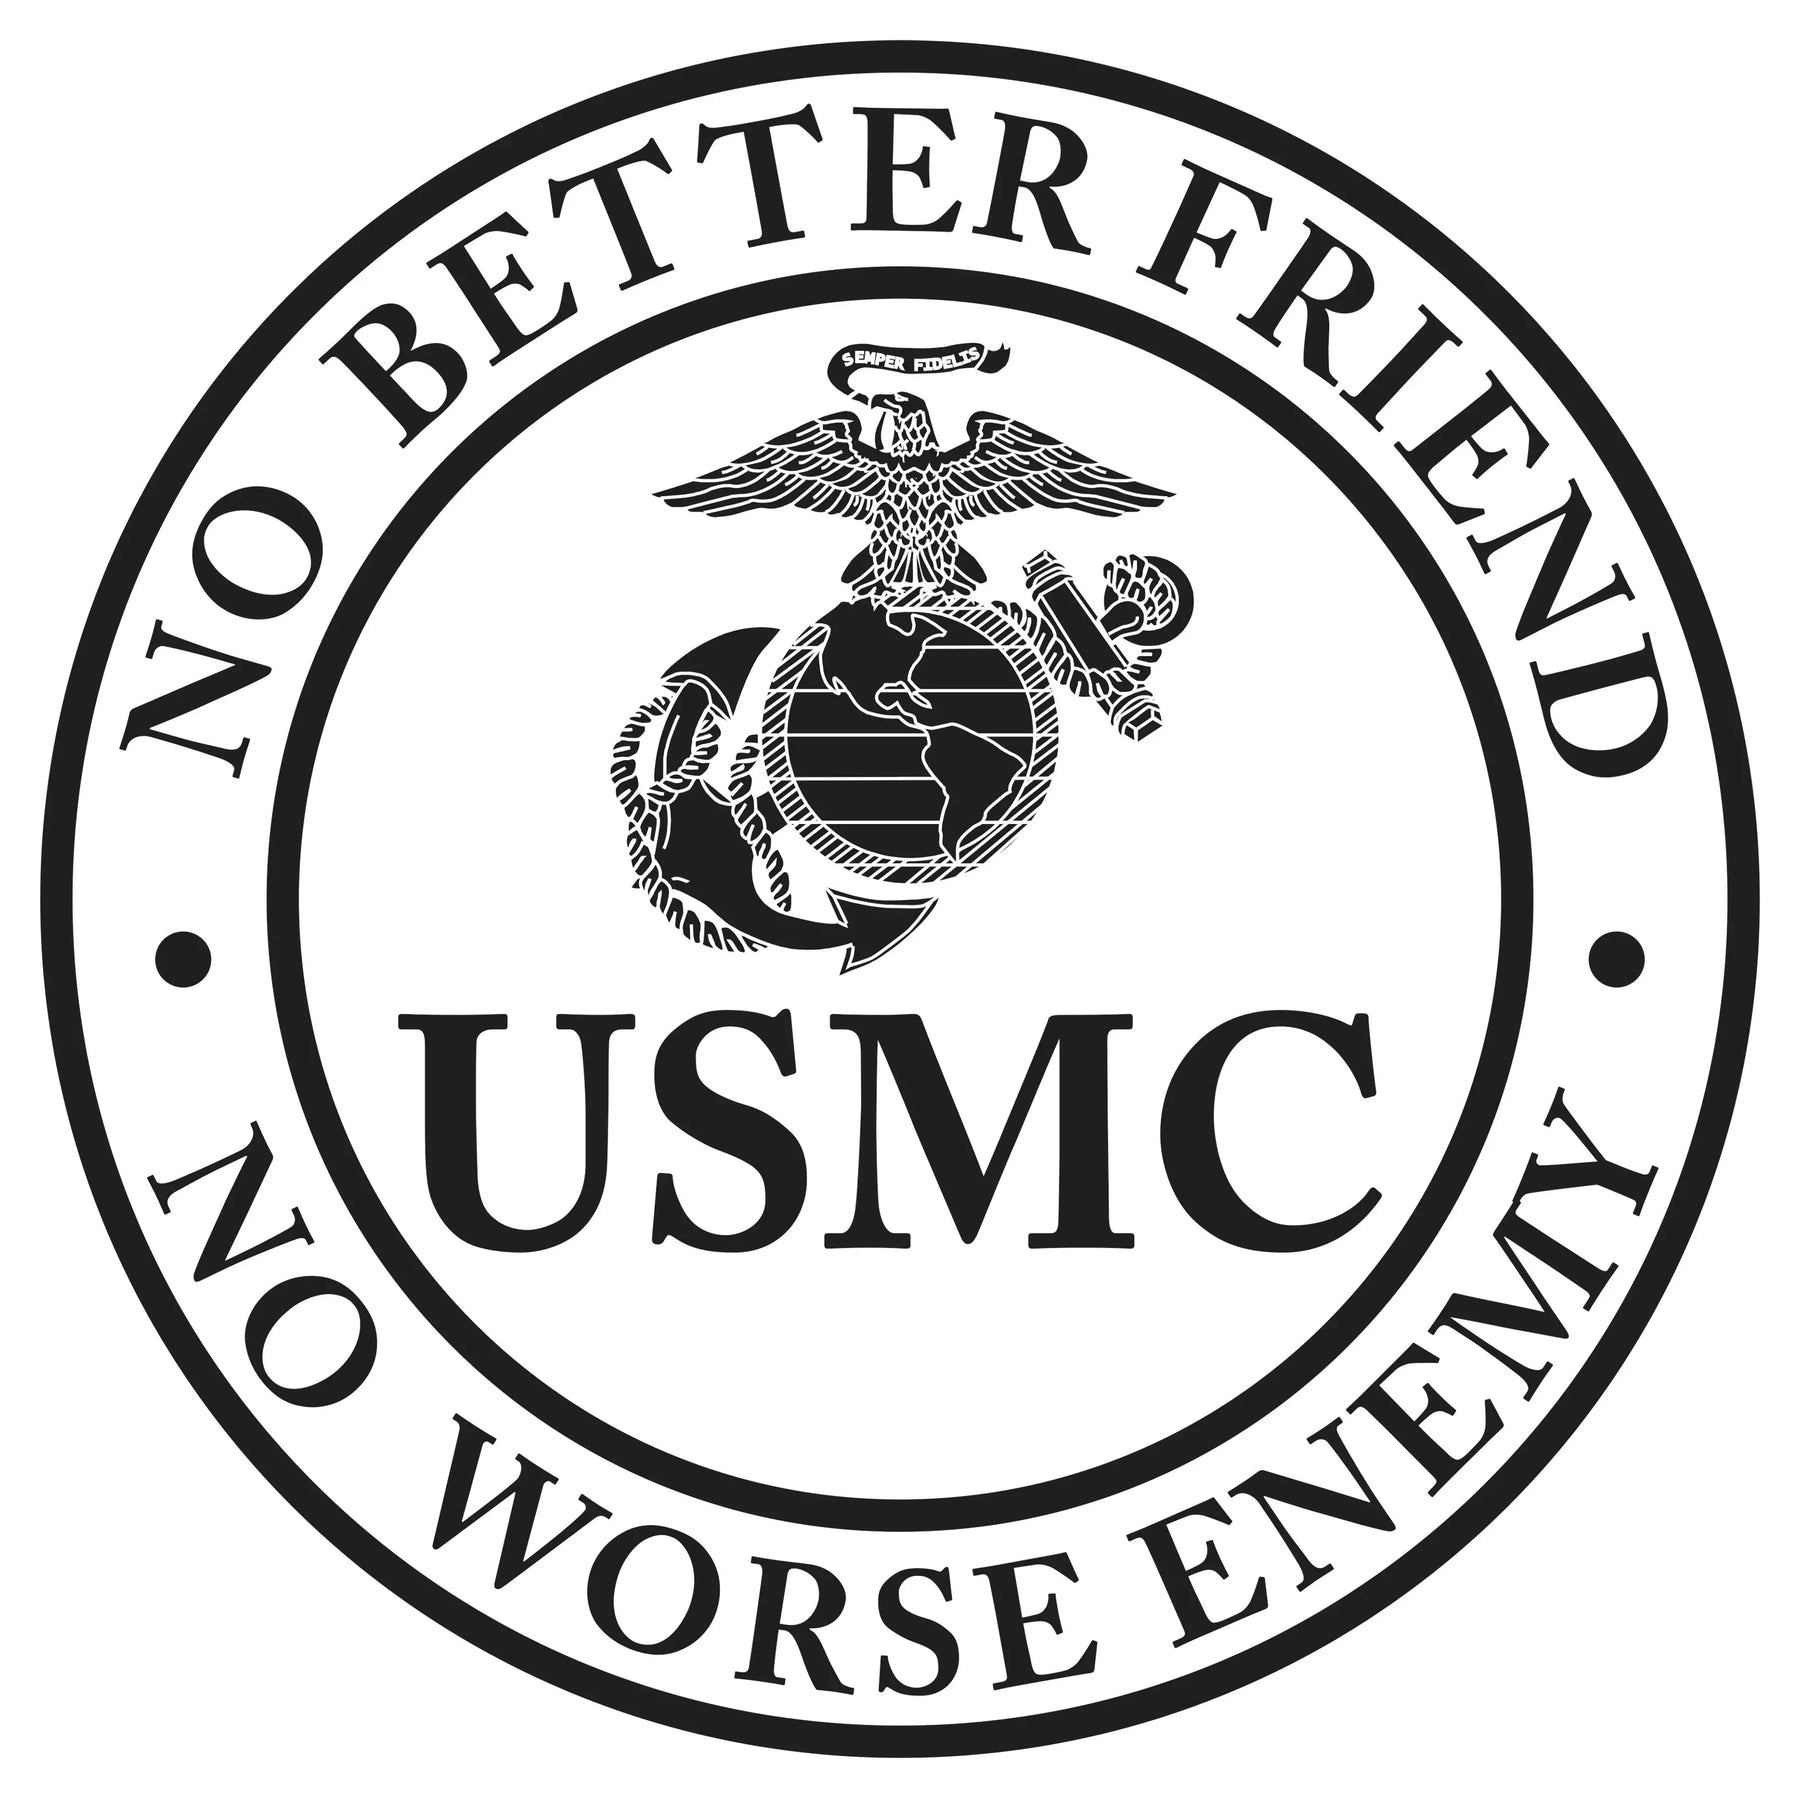 Marines No Better Friend 2-Sided Tee